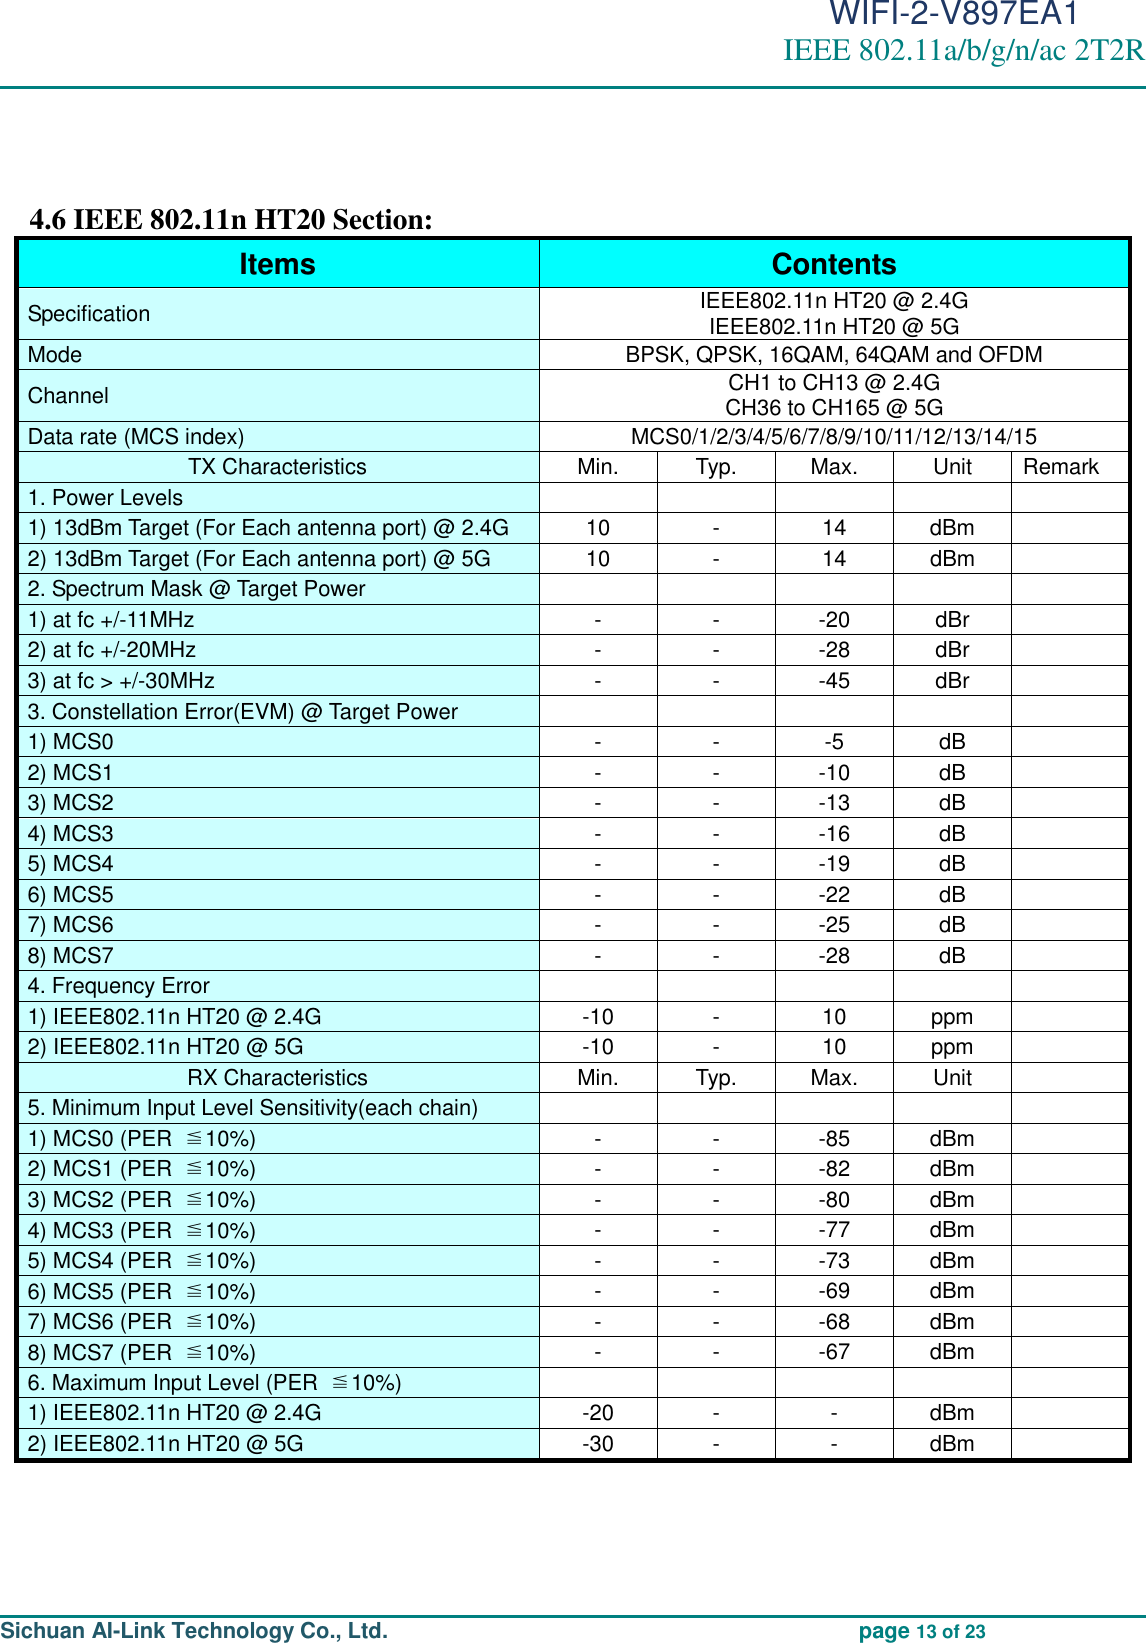                                                                                          WIFI-2-V897EA1 IEEE 802.11a/b/g/n/ac 2T2R                                                                                                                                                                                                                                                                                                                                                                                                                     Sichuan AI-Link Technology Co., Ltd.                                             page 13 of 23   4.6 IEEE 802.11n HT20 Section: Items   Contents   Specification   IEEE802.11n HT20 @ 2.4G   IEEE802.11n HT20 @ 5G Mode   BPSK, QPSK, 16QAM, 64QAM and OFDM Channel   CH1 to CH13 @ 2.4G CH36 to CH165 @ 5G Data rate (MCS index)   MCS0/1/2/3/4/5/6/7/8/9/10/11/12/13/14/15   TX Characteristics   Min.   Typ.   Max.   Unit   Remark 1. Power Levels             1) 13dBm Target (For Each antenna port) @ 2.4G 10 - 14 dBm     2) 13dBm Target (For Each antenna port) @ 5G 10 - 14 dBm  2. Spectrum Mask @ Target Power           1) at fc +/-11MHz   - - -20 dBr     2) at fc +/-20MHz   - - -28 dBr     3) at fc &gt; +/-30MHz   - - -45 dBr     3. Constellation Error(EVM) @ Target Power           1) MCS0   - - -5 dB     2) MCS1   - - -10 dB     3) MCS2   - - -13 dB     4) MCS3   - - -16 dB     5) MCS4   - - -19 dB     6) MCS5   - - -22 dB     7) MCS6   - - -25 dB     8) MCS7   - - -28 dB     4. Frequency Error         1) IEEE802.11n HT20 @ 2.4G -10 - 10 ppm    2) IEEE802.11n HT20 @ 5G -10 - 10 ppm    RX Characteristics   Min.   Typ.   Max.   Unit     5. Minimum Input Level Sensitivity(each chain)             1) MCS0 (PER  ≦10%)   - - -85 dBm     2) MCS1 (PER  ≦10%)   - - -82 dBm     3) MCS2 (PER  ≦10%)   - - -80 dBm     4) MCS3 (PER  ≦10%)   - - -77 dBm     5) MCS4 (PER  ≦10%)   - - -73 dBm     6) MCS5 (PER  ≦10%)   - - -69 dBm     7) MCS6 (PER  ≦10%)   - - -68 dBm     8) MCS7 (PER  ≦10%) - - -67 dBm     6. Maximum Input Level (PER  ≦10%)         1) IEEE802.11n HT20 @ 2.4G -20 - - dBm    2) IEEE802.11n HT20 @ 5G -30 - - dBm       